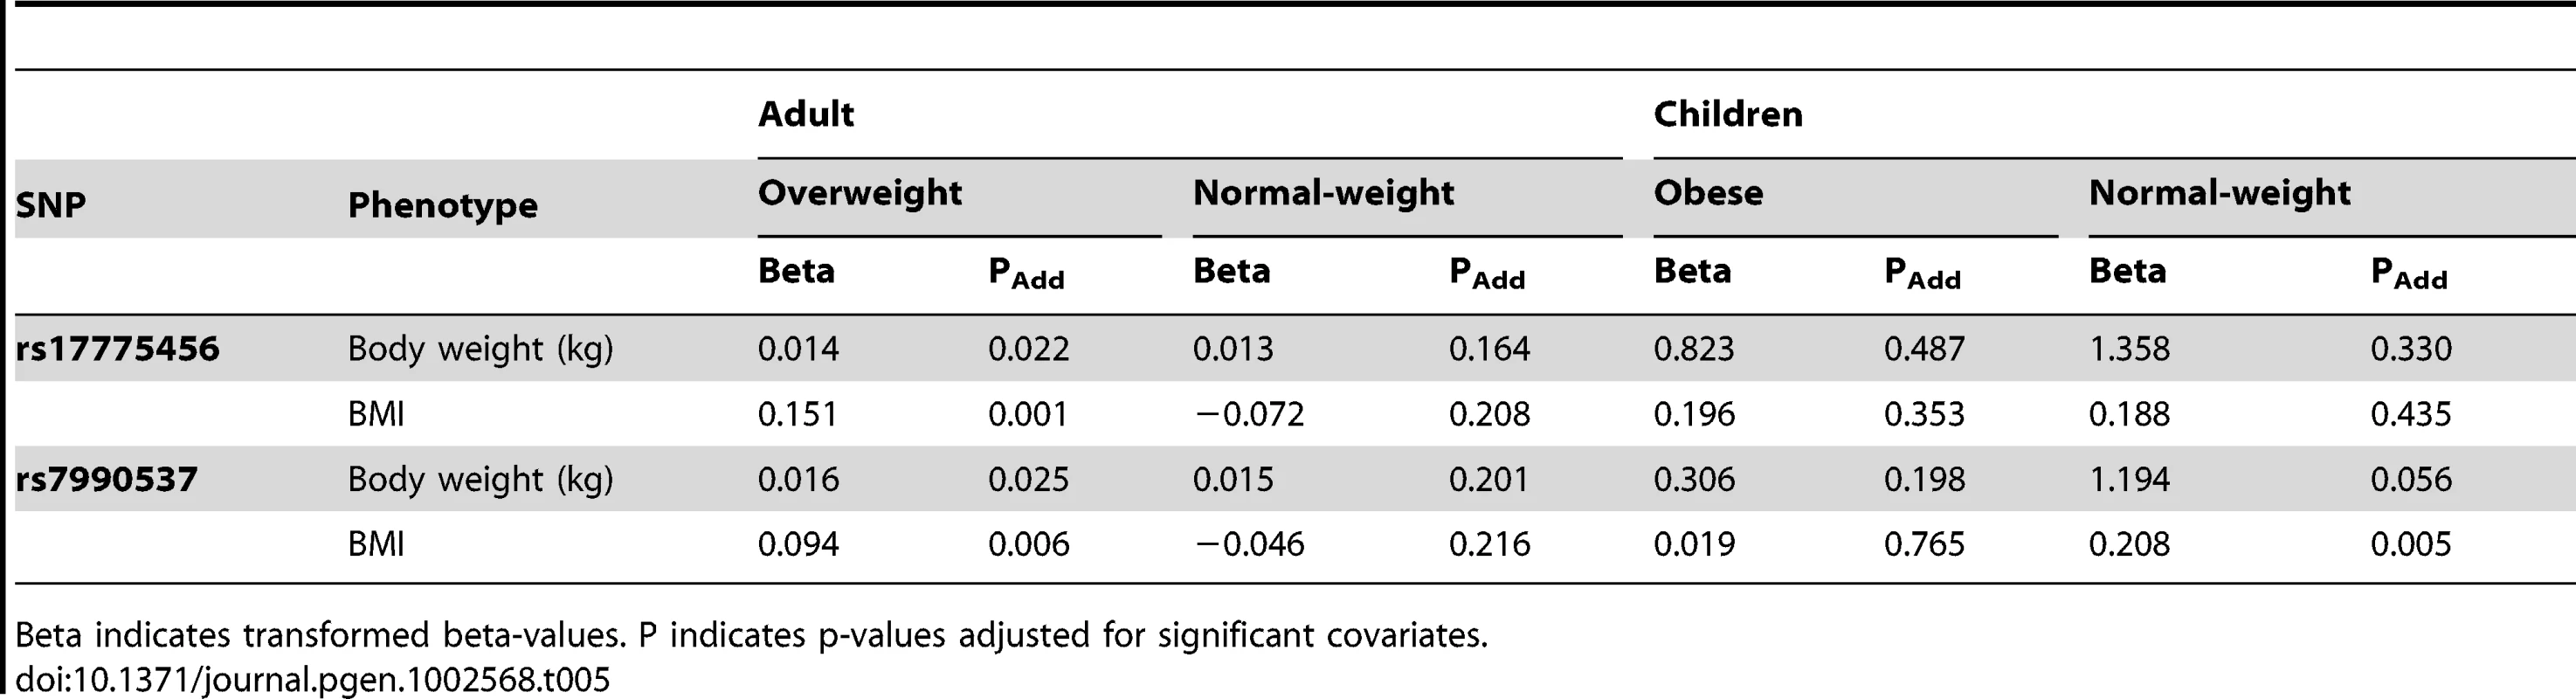 Association with BMI and body weight as continuous traits in adults and children for <i>NBEA</i> rs17775456 and rs7990537.